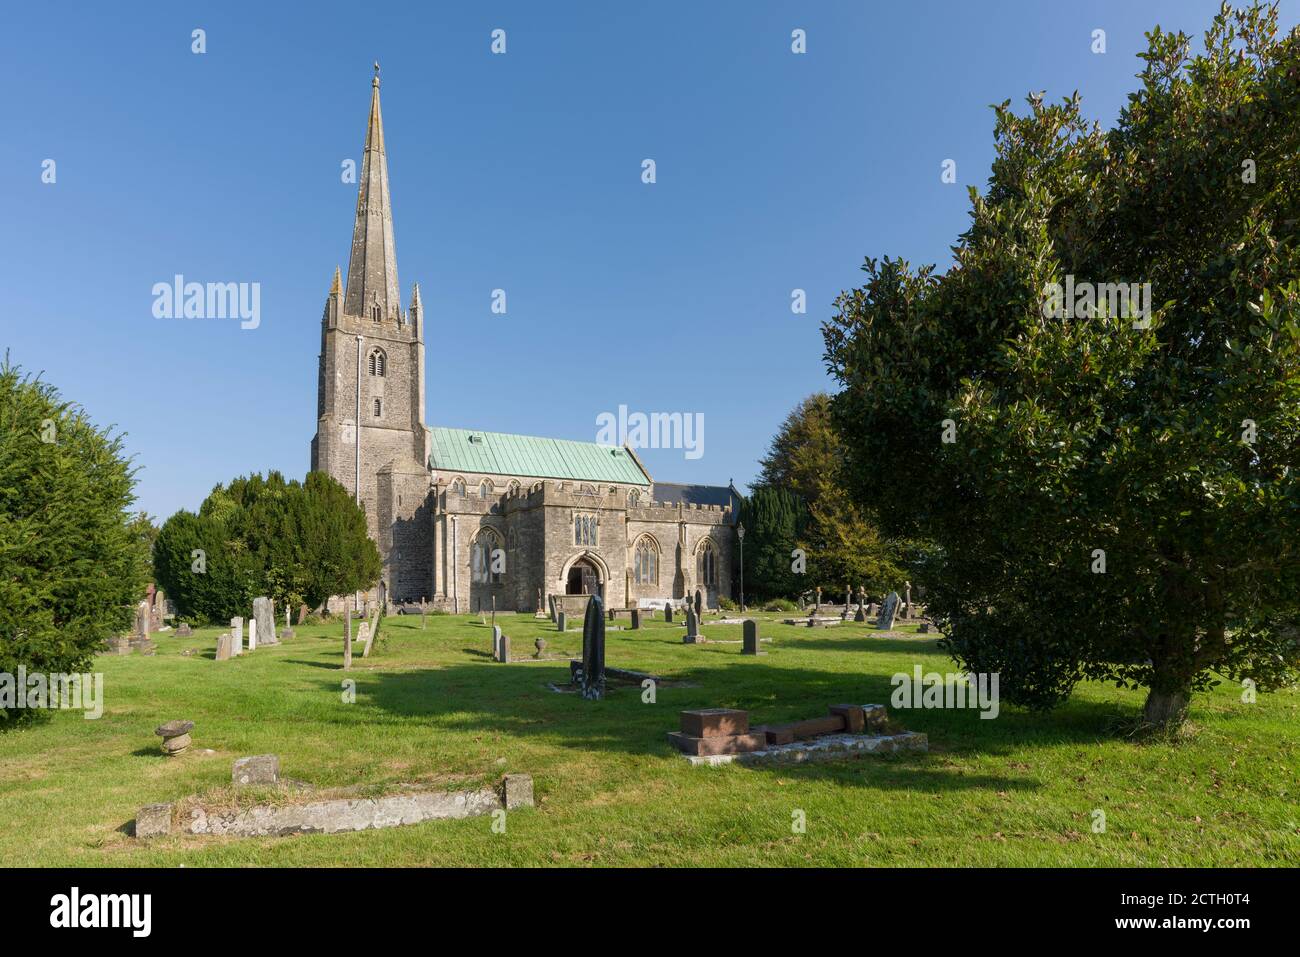 St Andrew’s Church in the village of Congresbury, North Somerset, England. Stock Photo